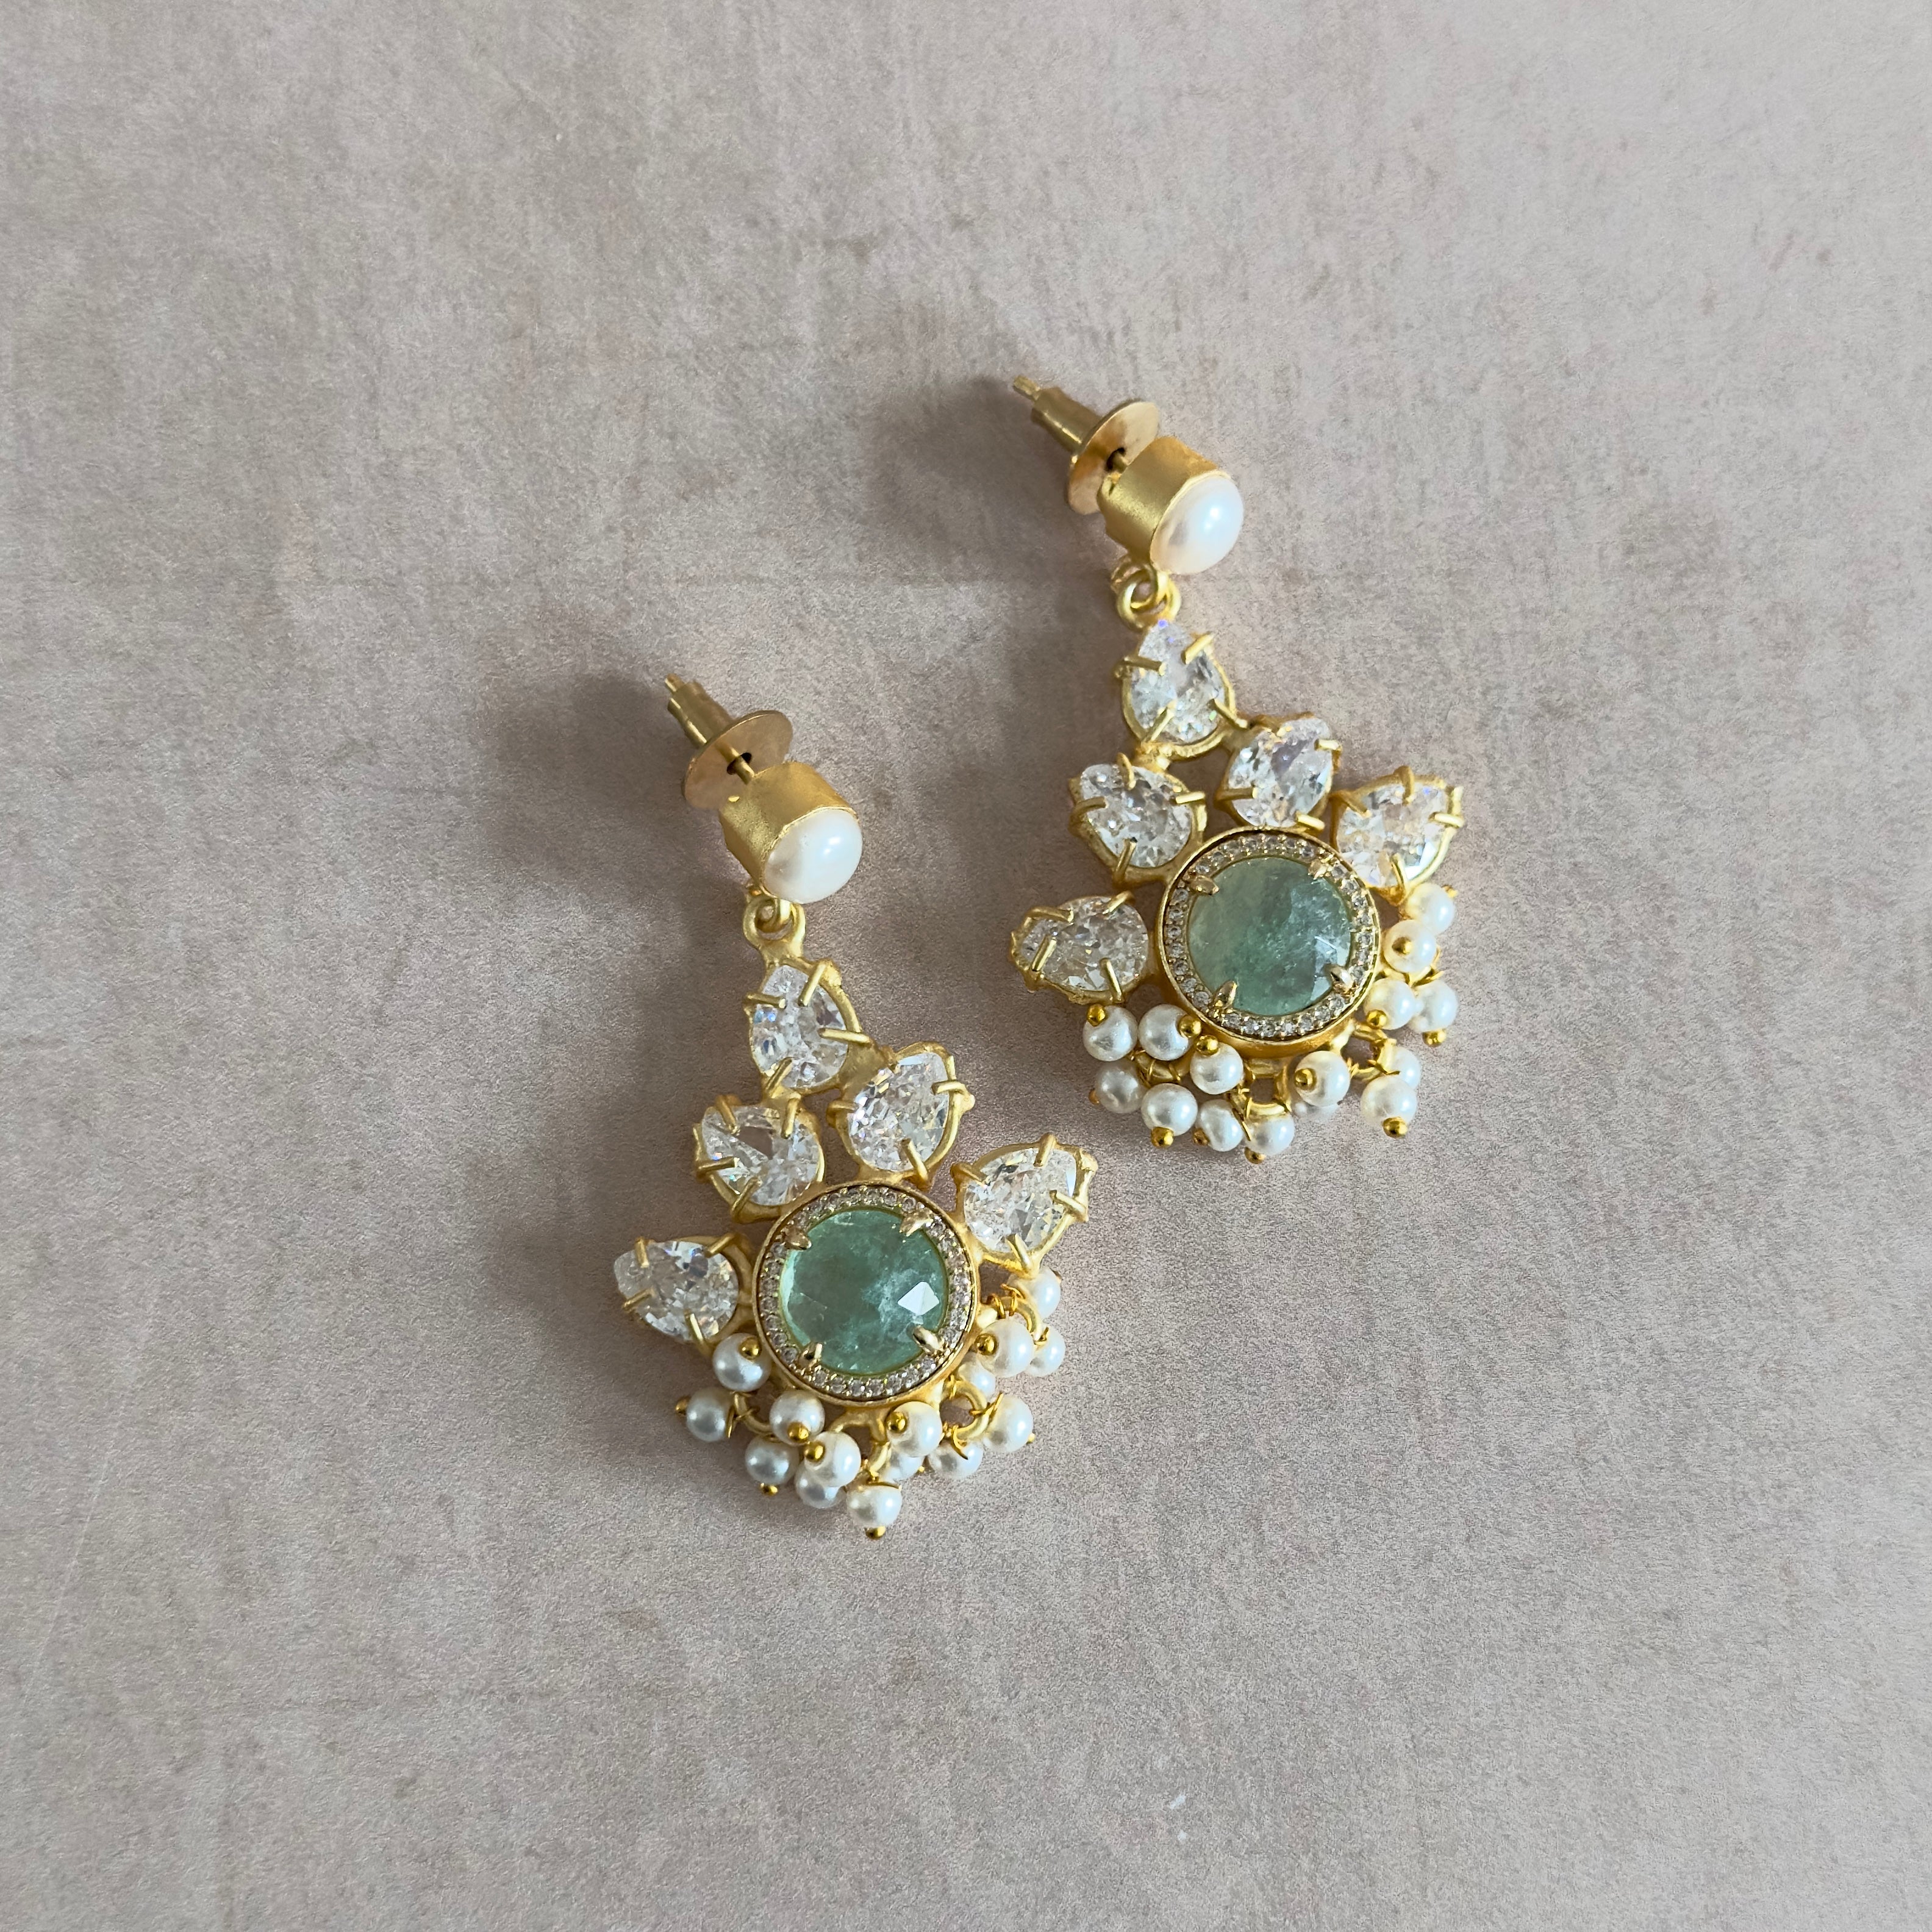 Add a touch of elegance to your outfit with our Claudia Pearl Crystal Drop Earrings! Featuring stunning aquamarine crystals and pearl accents, these earrings will make you stand out with their crystal details. Perfect for a night out or special occasion.